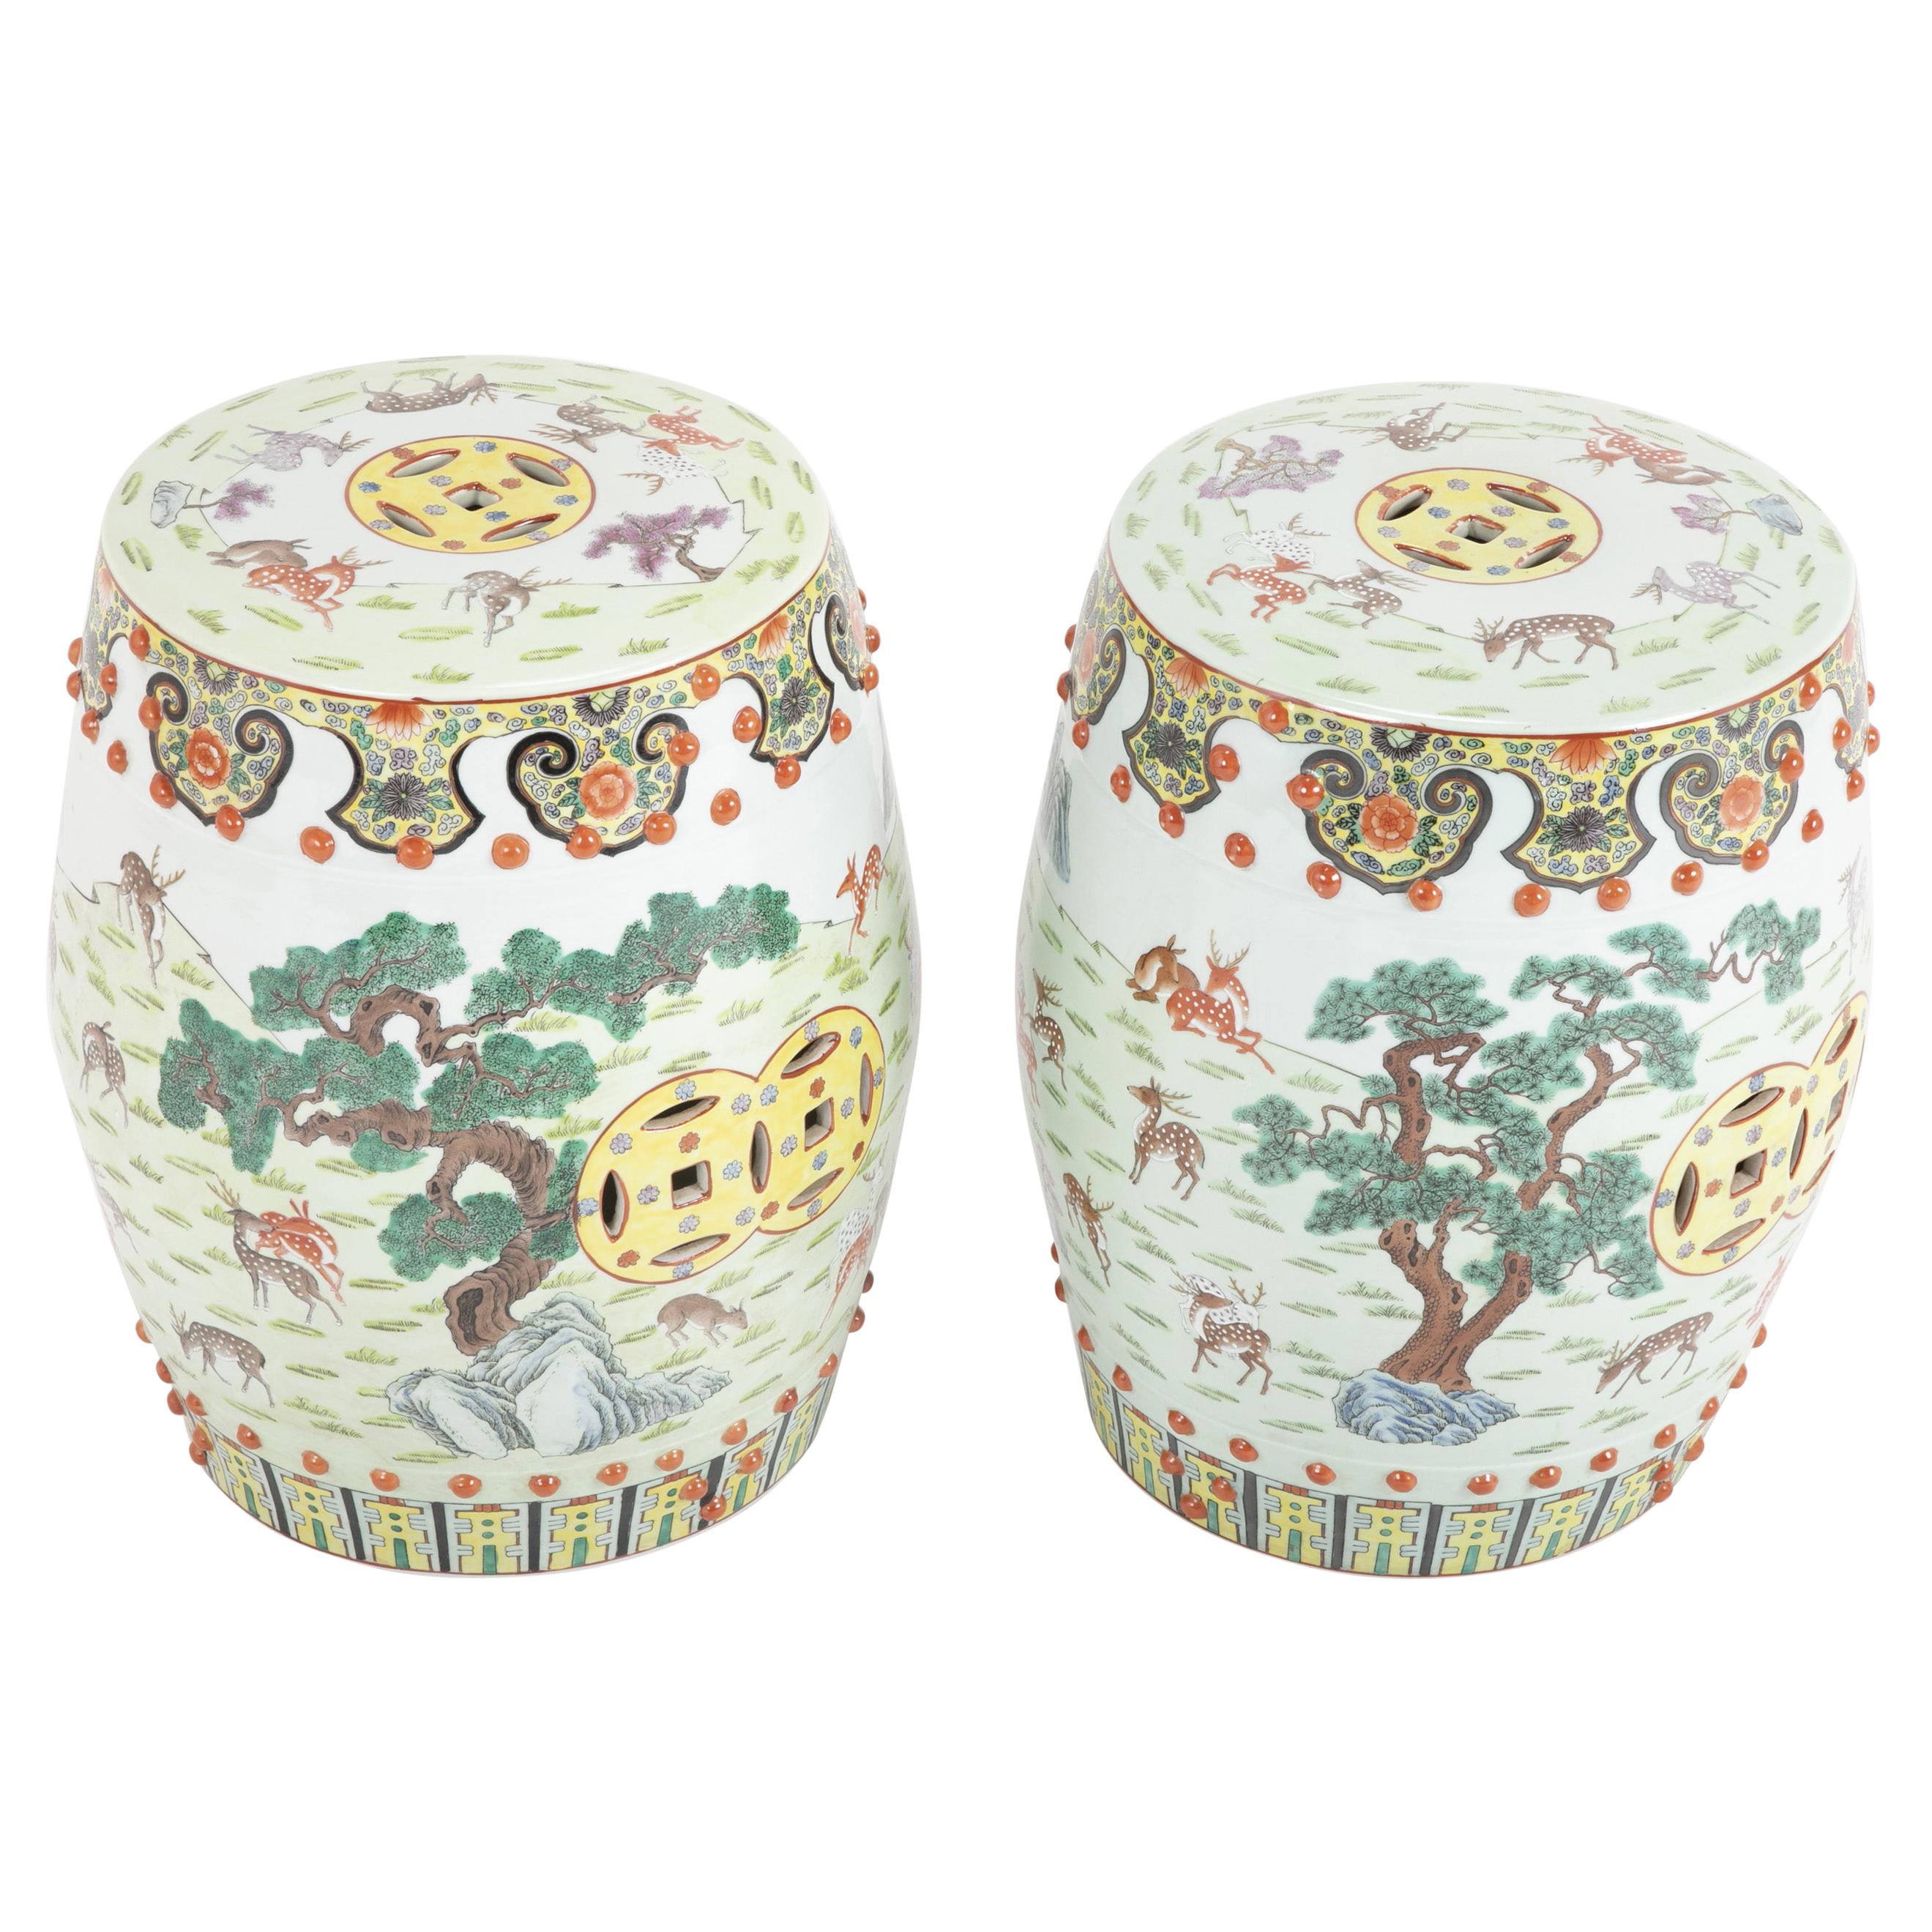 Pair of 19th Century Chinese Famille Rose Porcelain Garden Seat